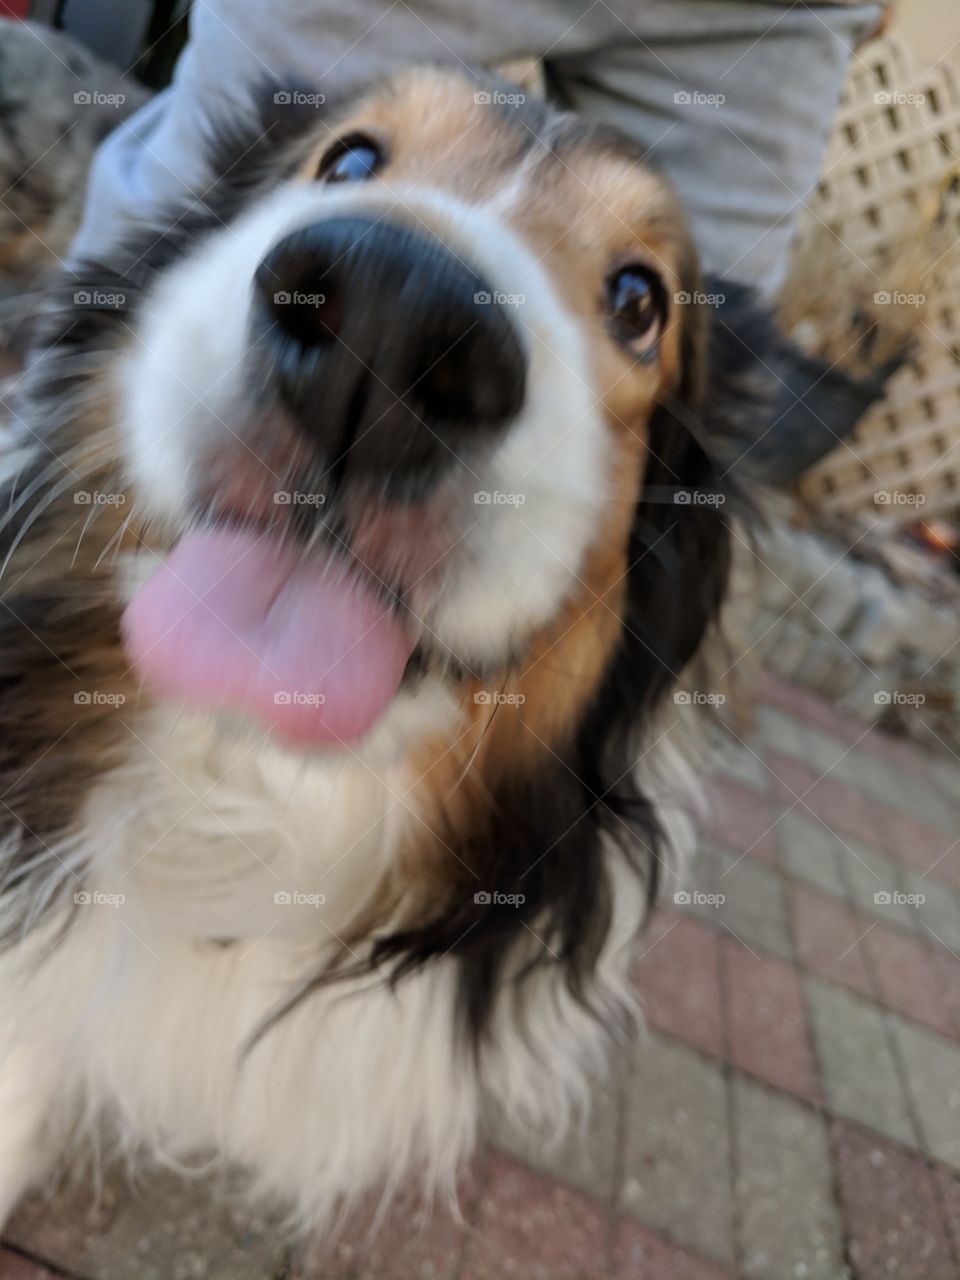 Sheltie kiss time, but you might get tounge.